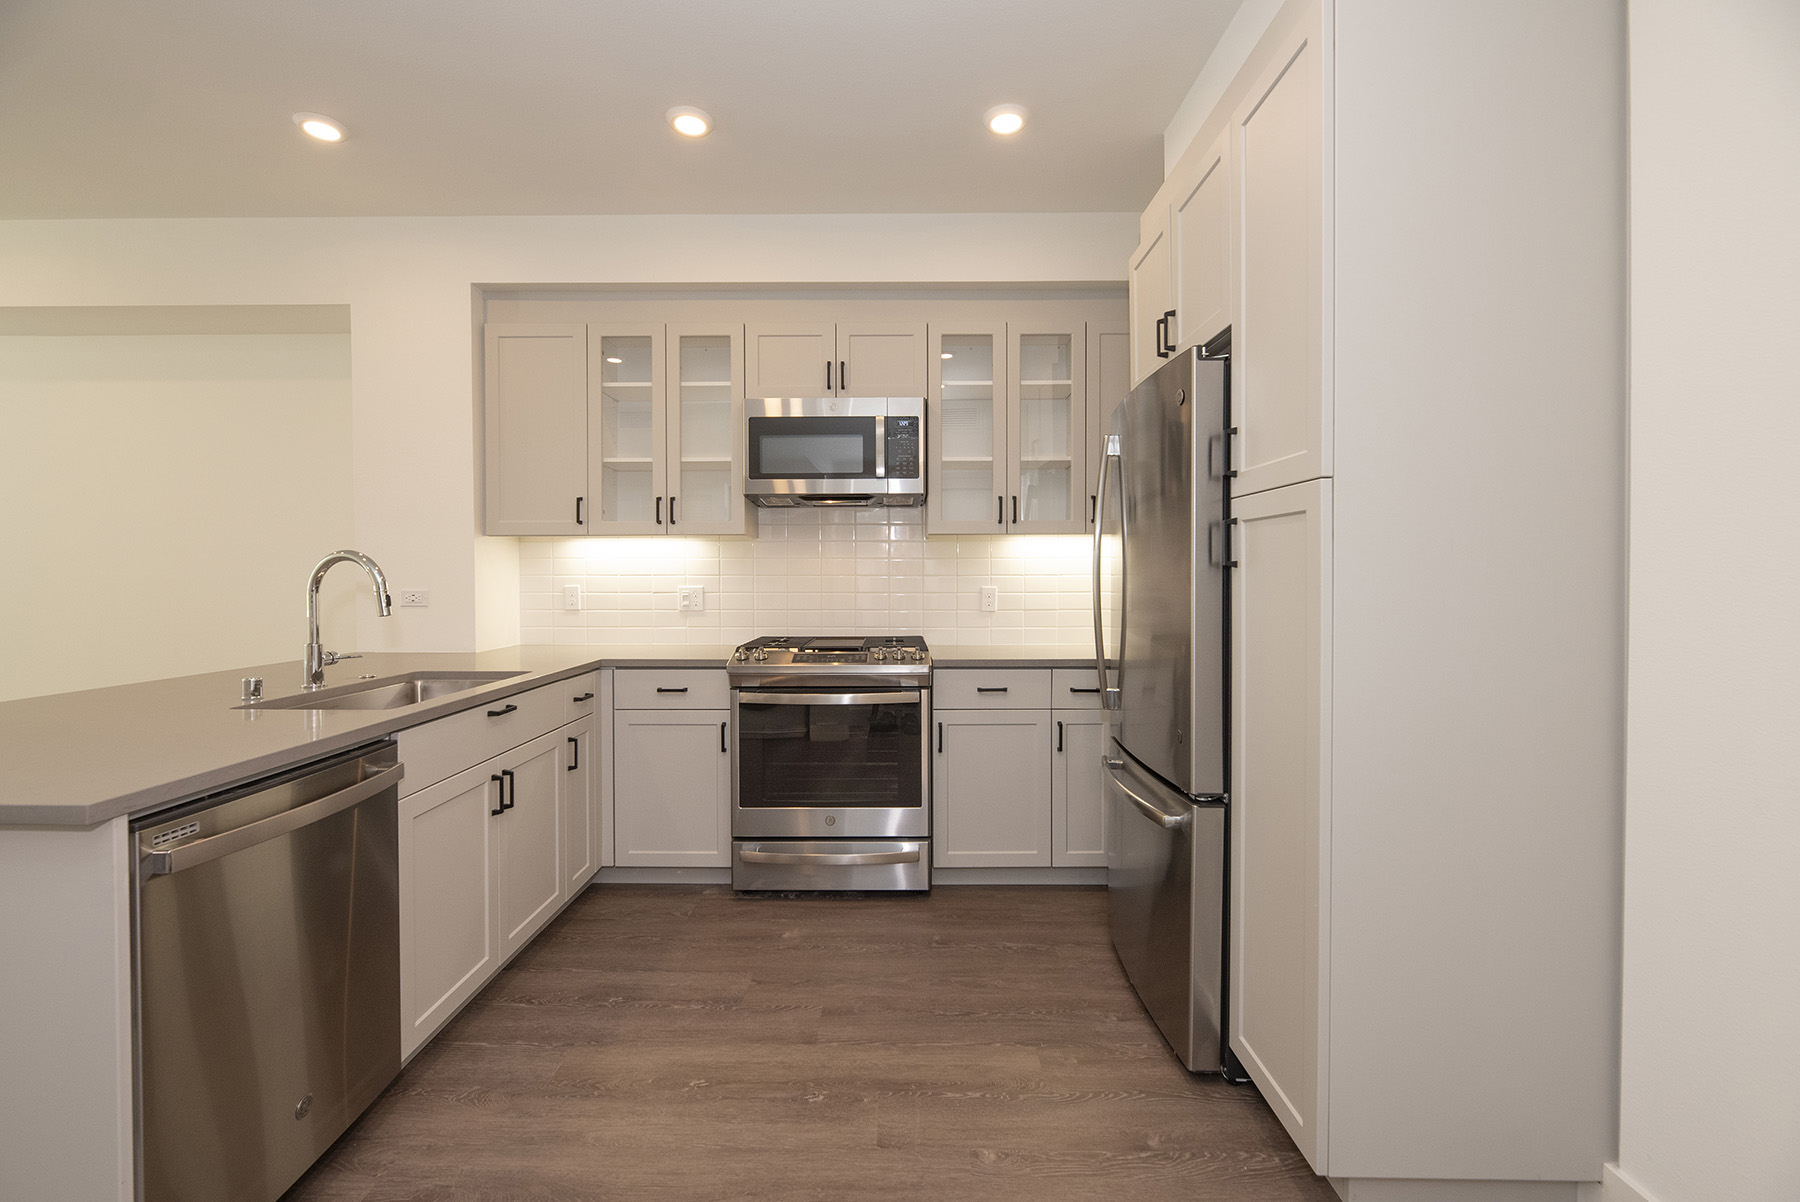 San Mateo CA Apartments - Azara - Updated Kitchen with White Cabinets, Stainless Steel Appliances, and Wood Flooring